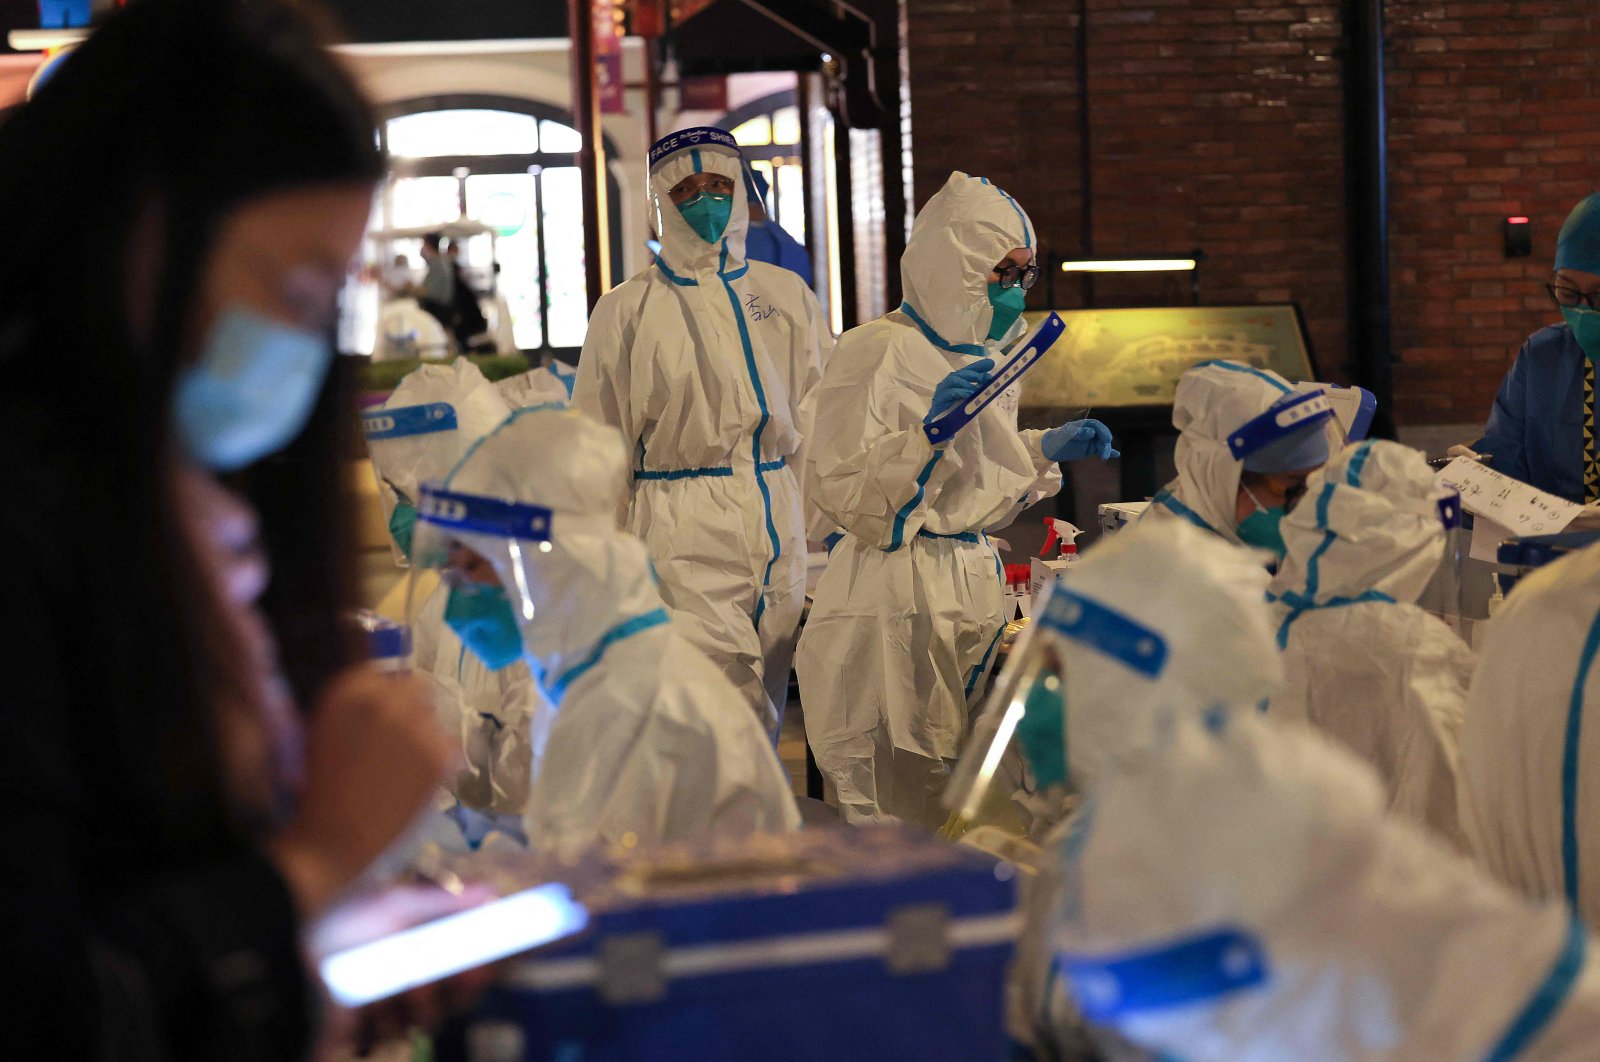 Medical personnel preparing to test visitors at Shanghai Disneyland for COVID-19, Shanghai, China, Oct. 31, 2021.